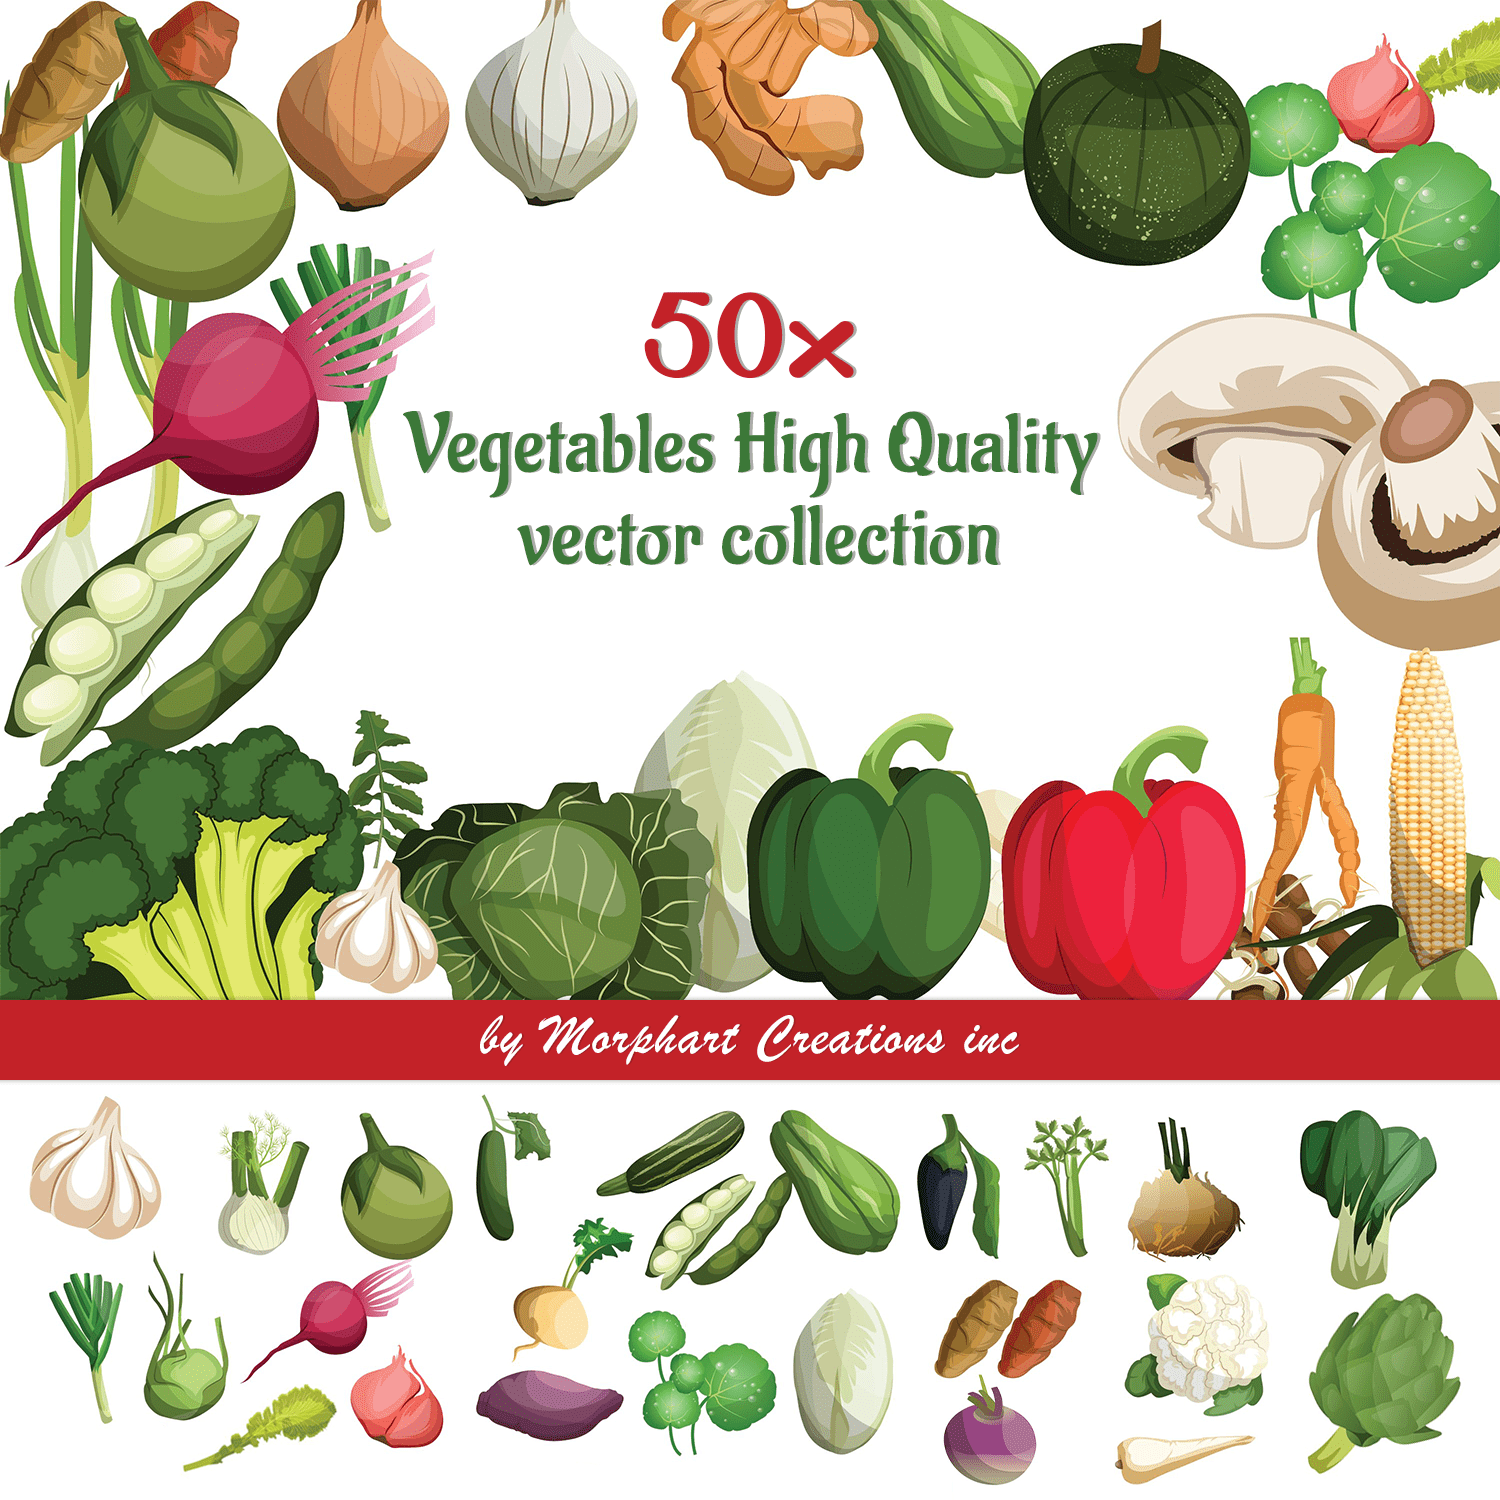 Cover with charming images of vegetables.